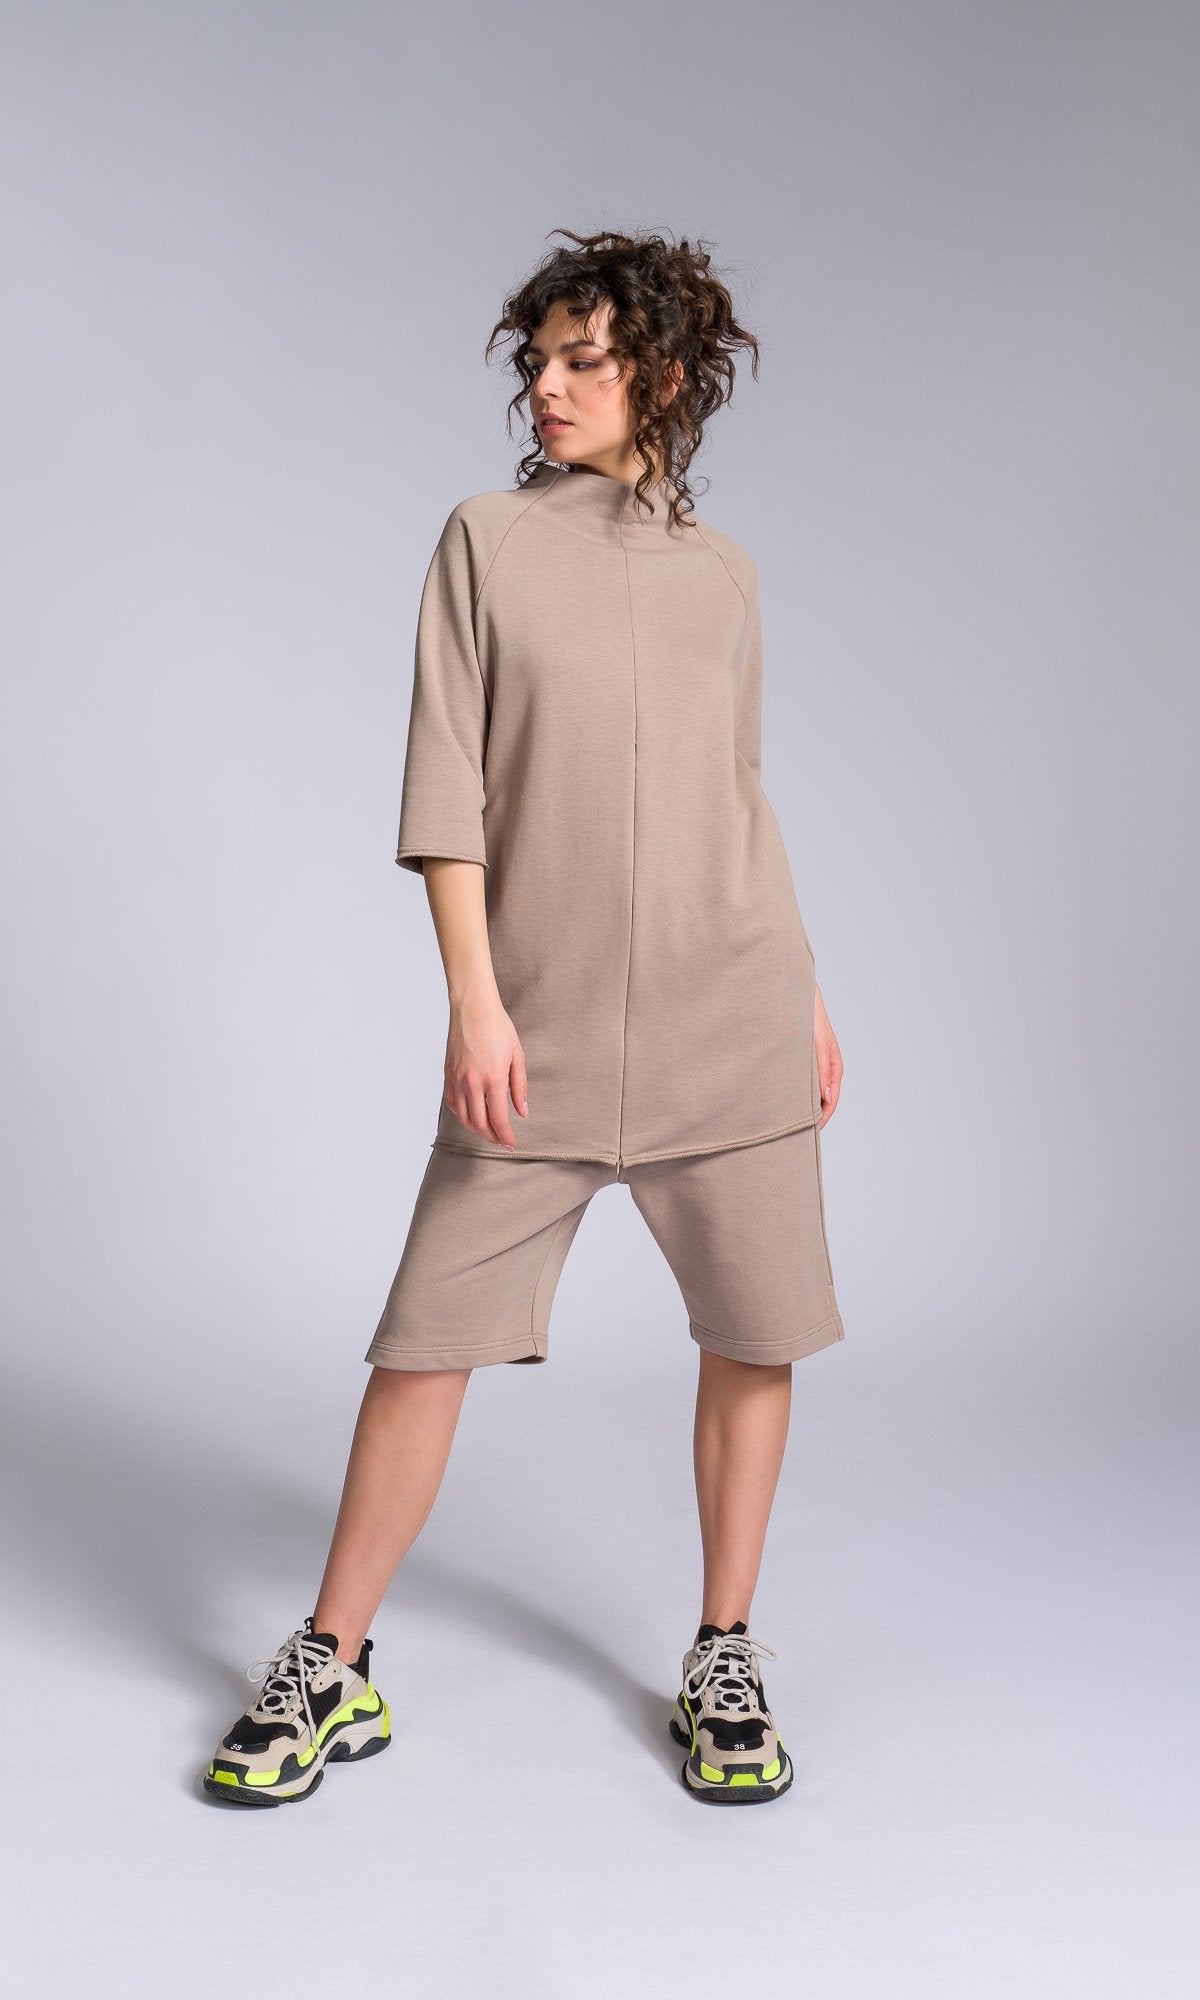 Two-piece Set of Tunic Sweatshirt with Zipper Slits and Cotton Shorts